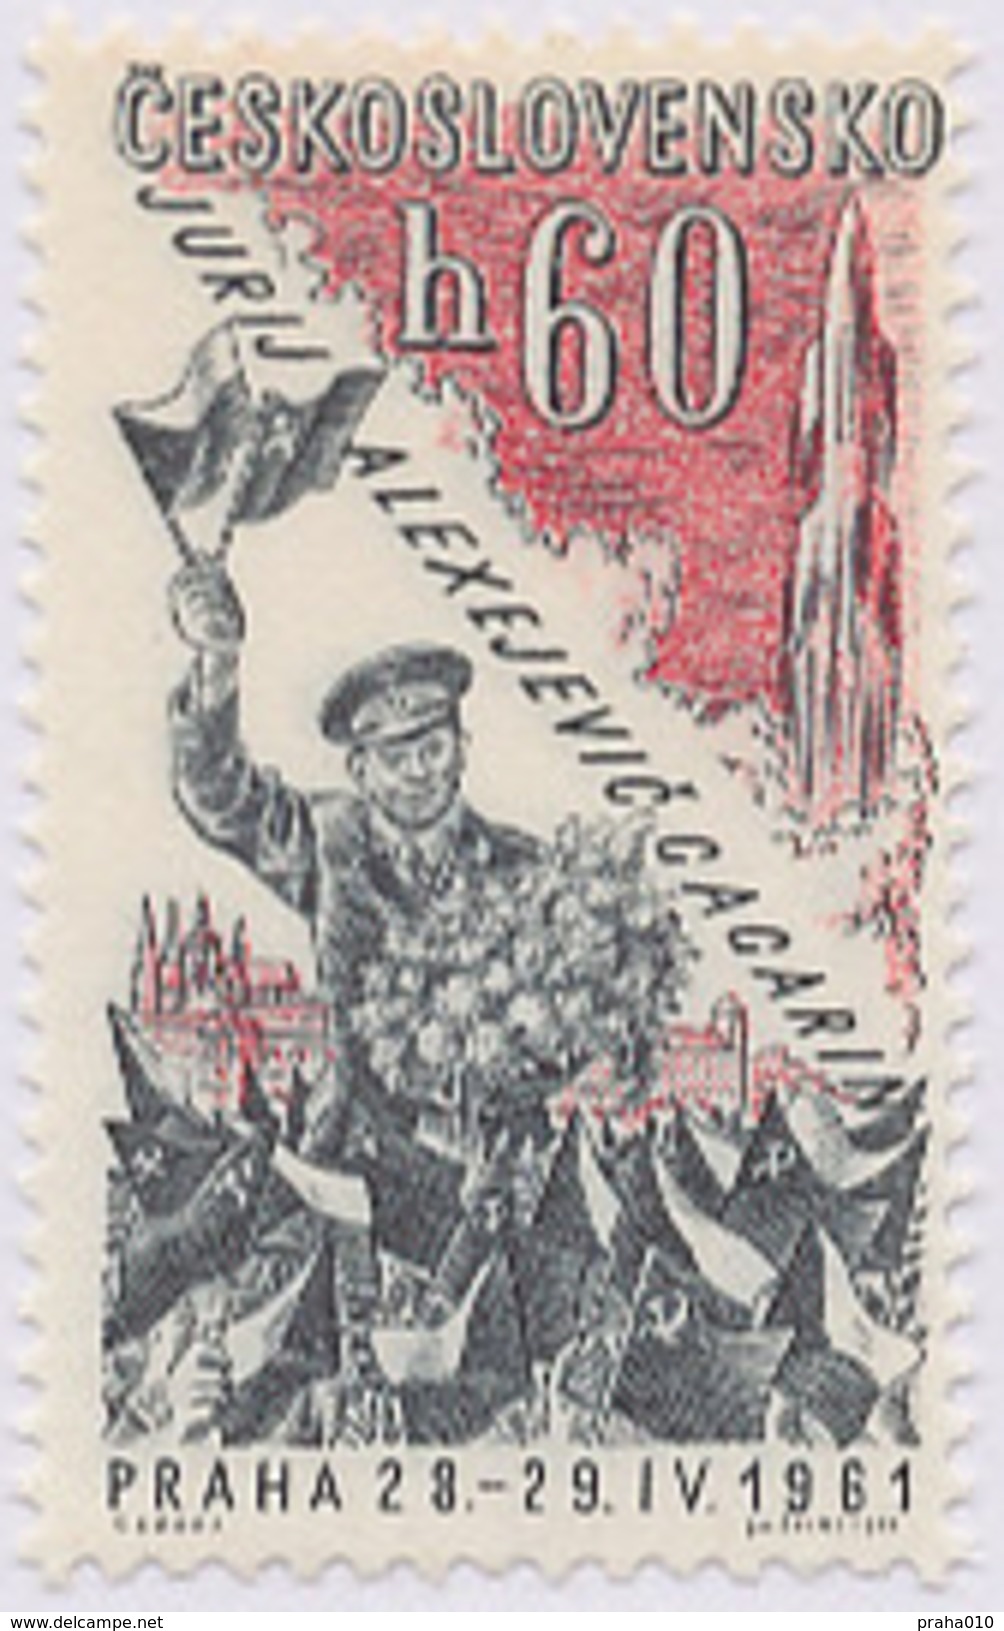 Czechoslovakia / Stamps (1961) L0048 (Air Mail Stamp): Yuri Alekseyevich Gagarin (1934-1968); Painter: Cyril Bouda - Luchtpost